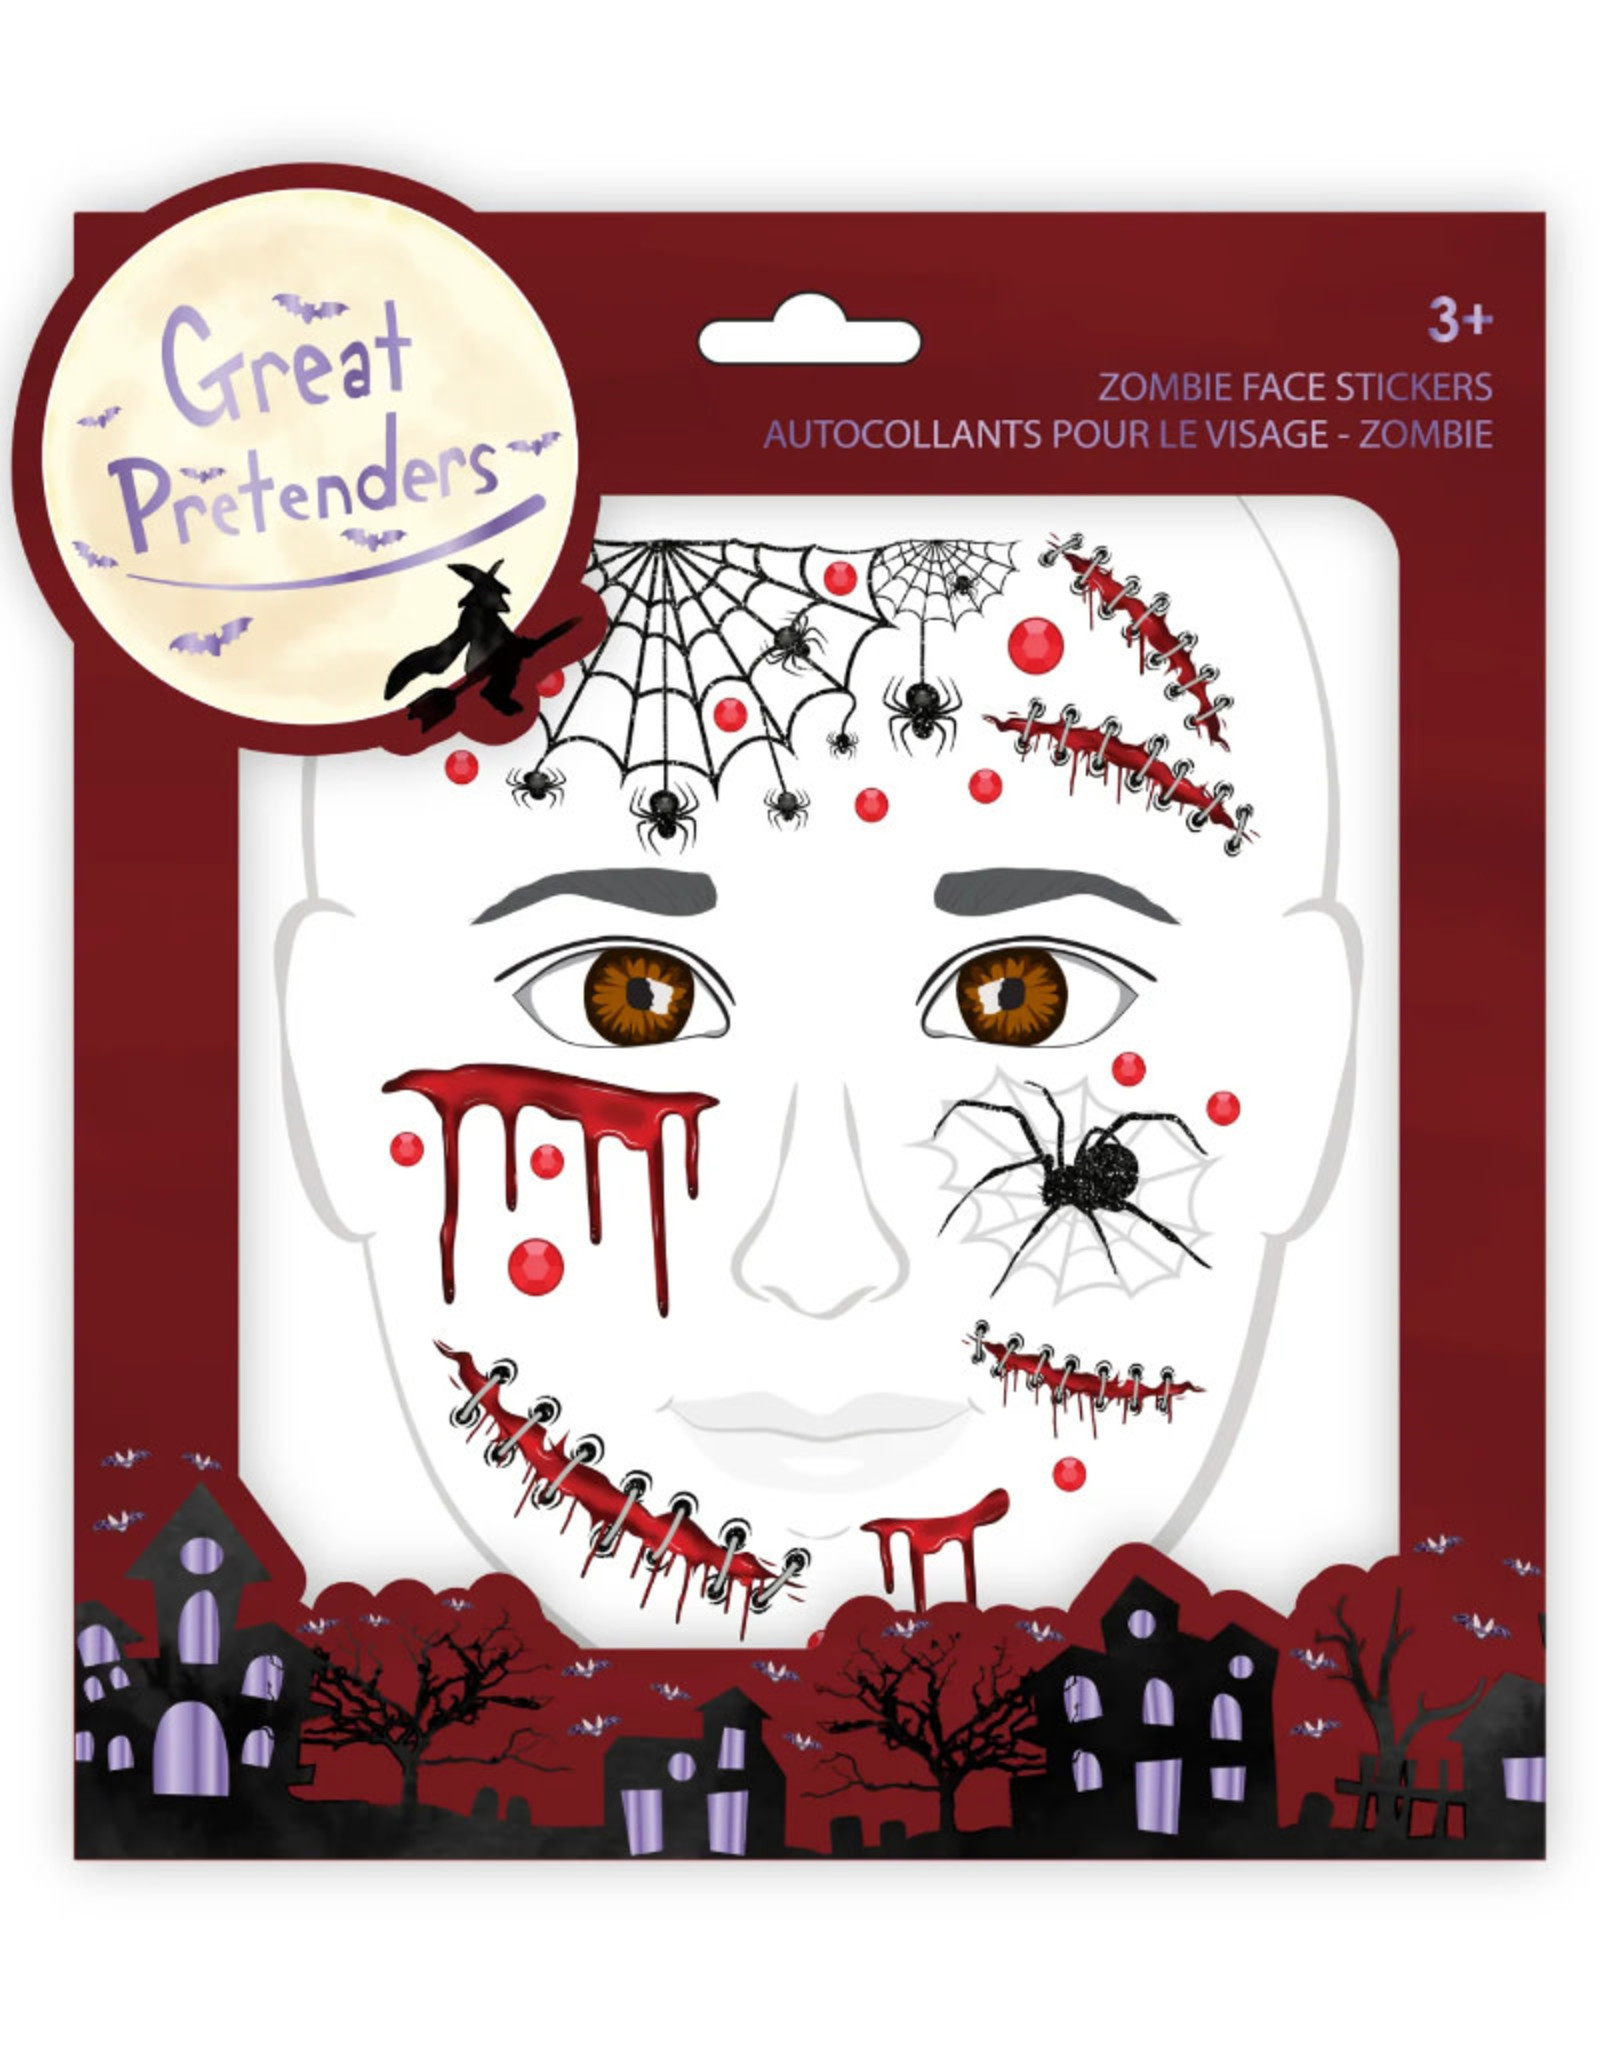 Great Pretenders Zombie Face Stickers